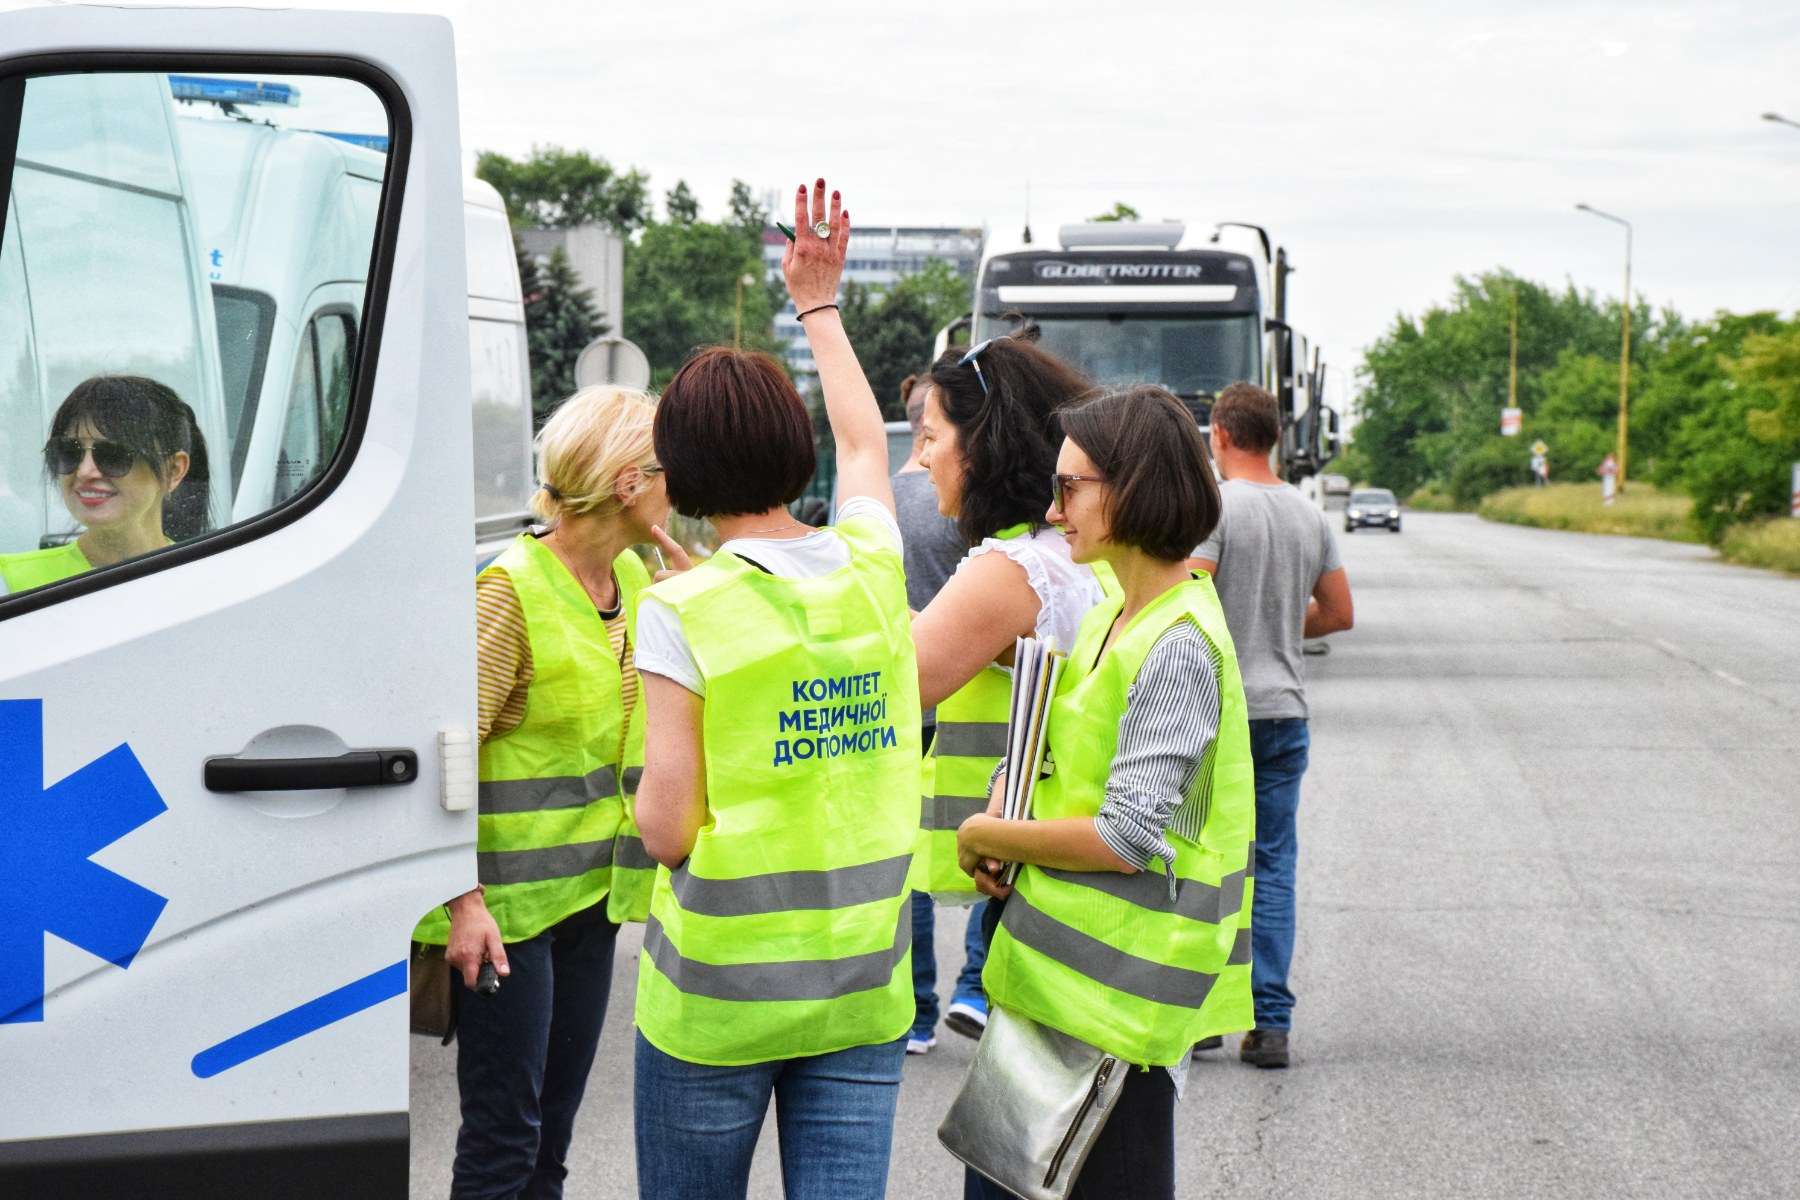 A short history of great work resulting in delivery of 11 ambulances to Ukraine